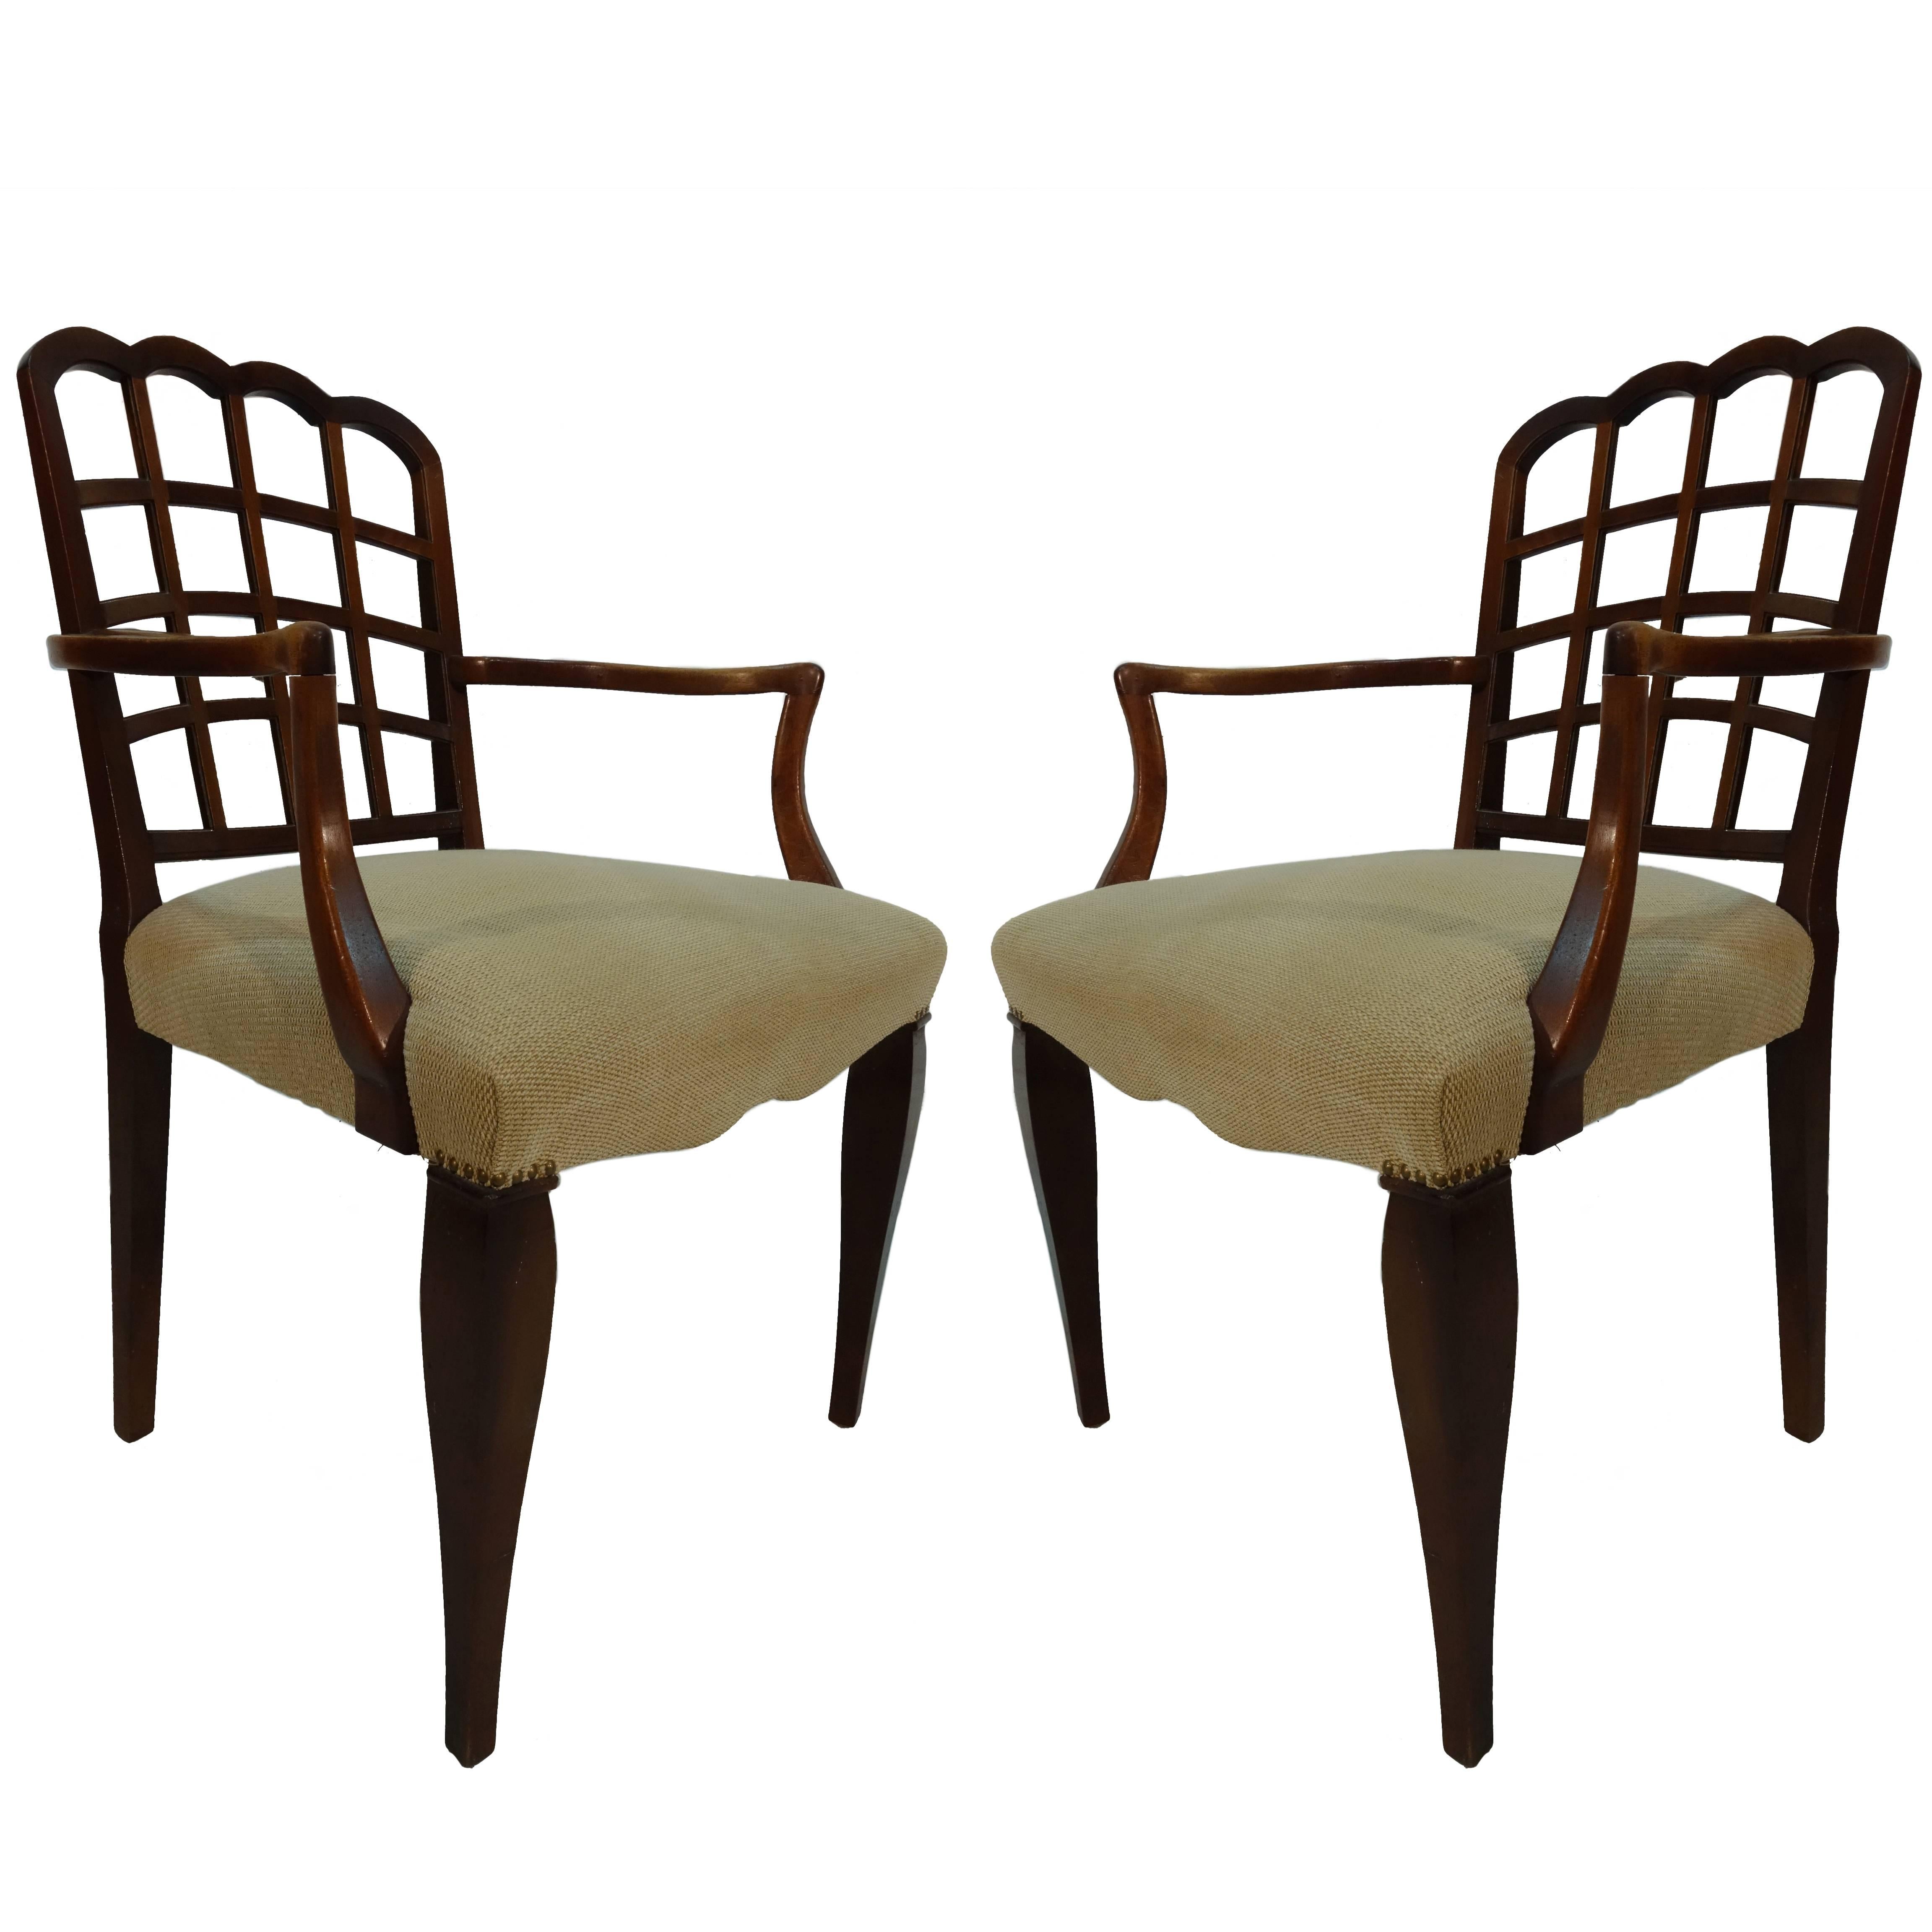 Pair of Early 20th Century Aesthetic Movement Armchairs For Sale